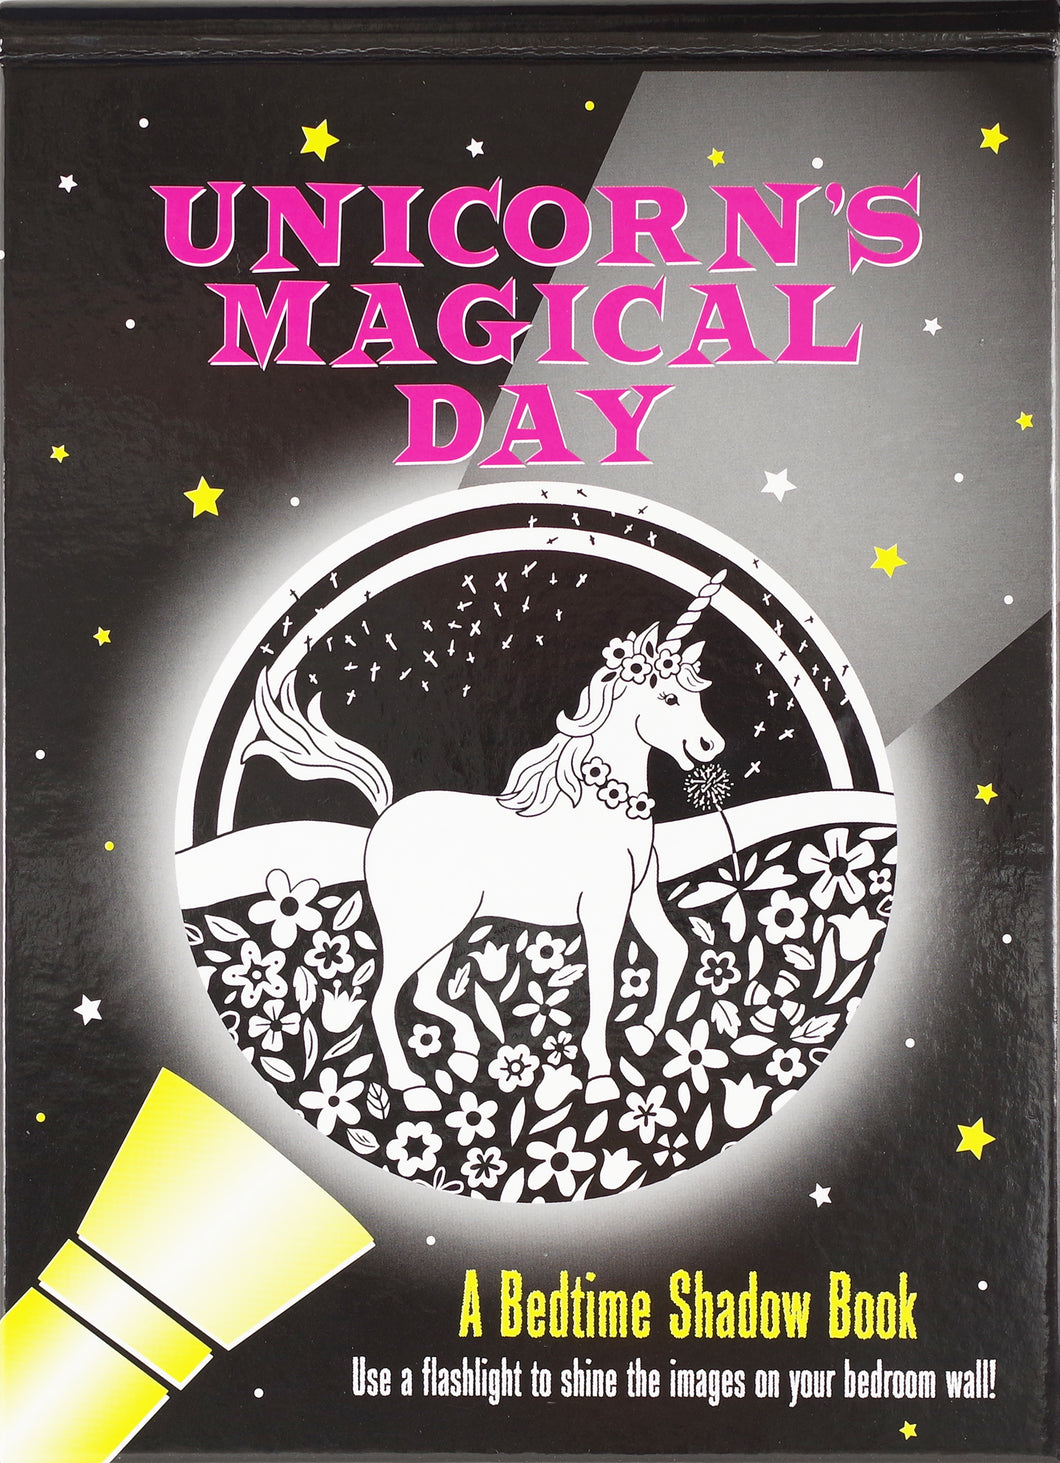 Unicorn's Magical Day A Bedtime Shadow Book